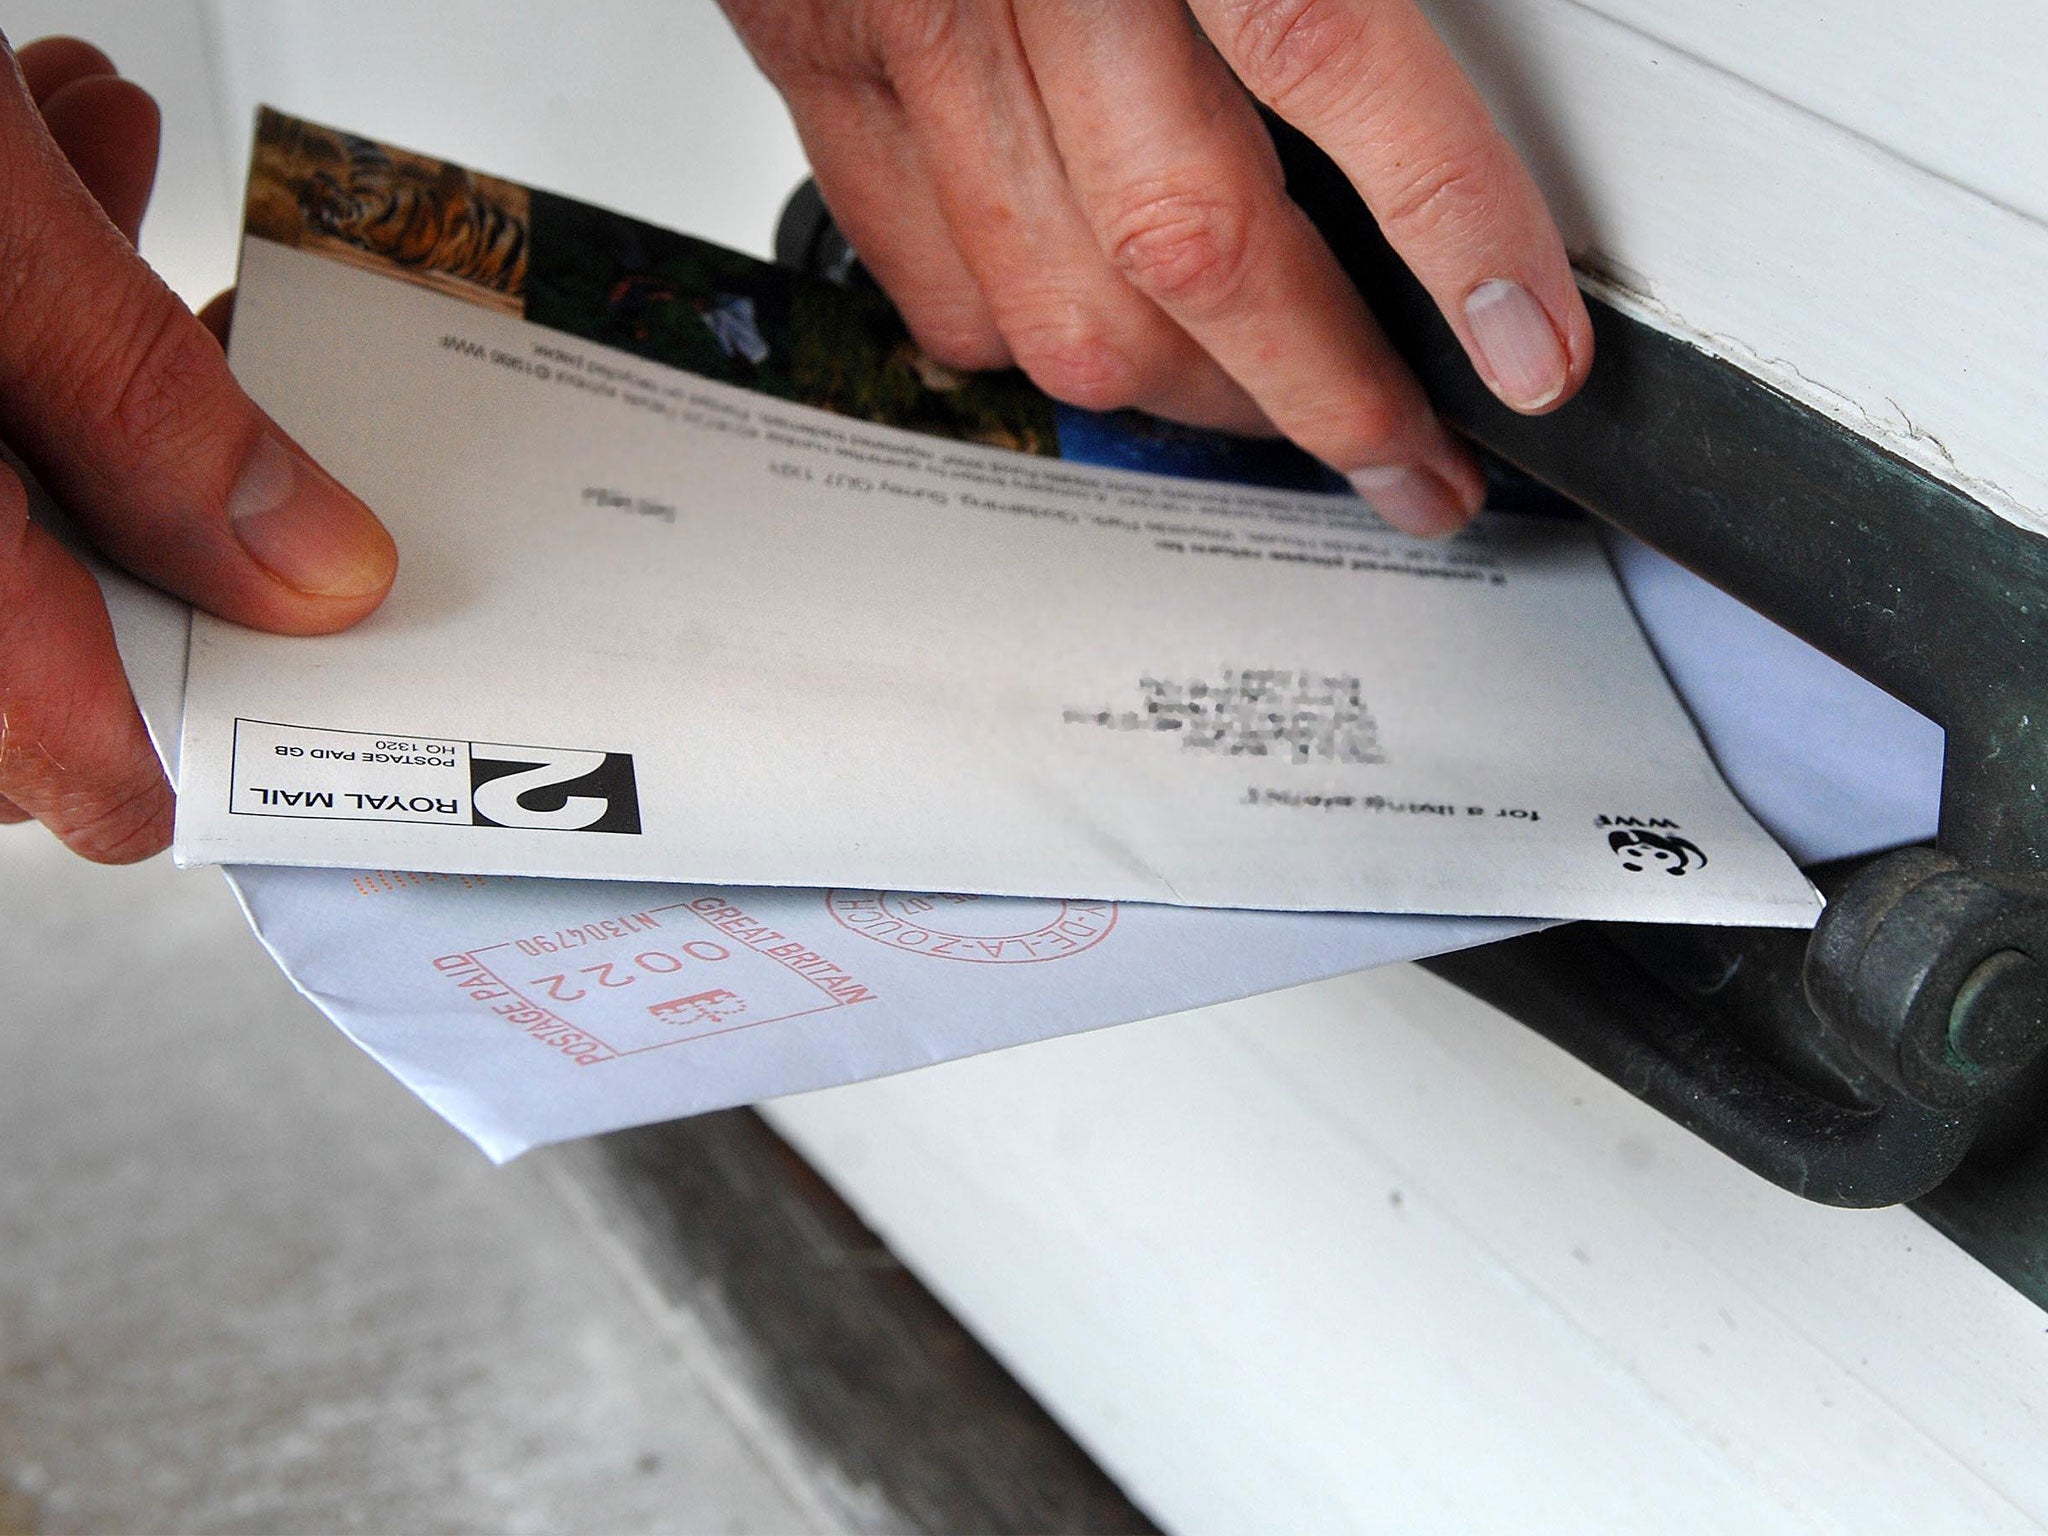 A Citizens Advice report found homeless people miss out on services because they do not have a permanent postal address